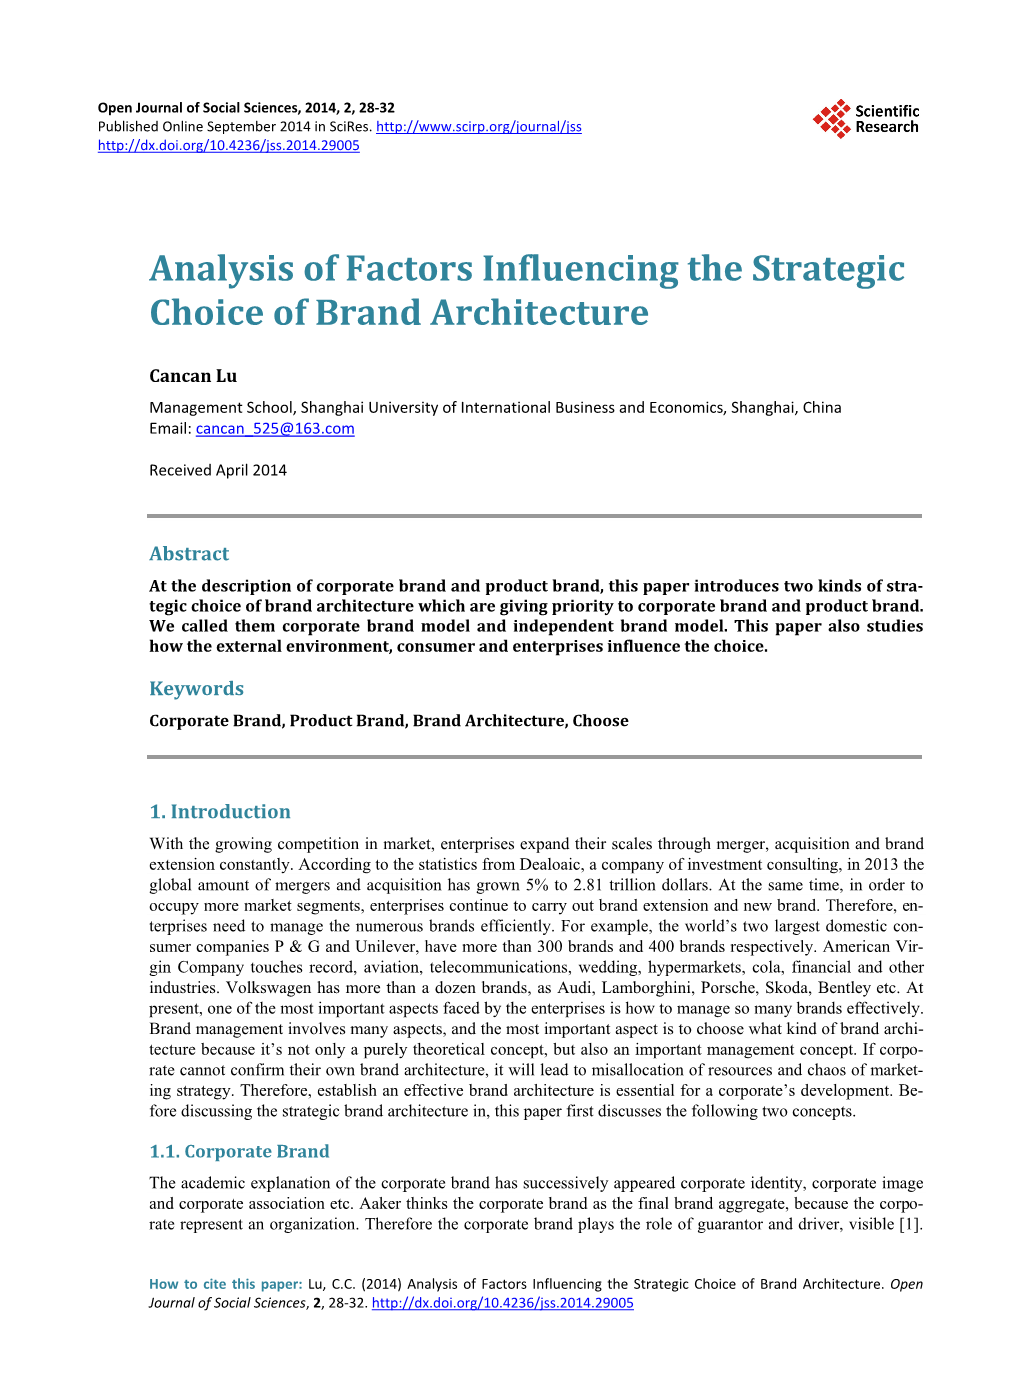 Analysis of Factors Influencing the Strategic Choice of Brand Architecture